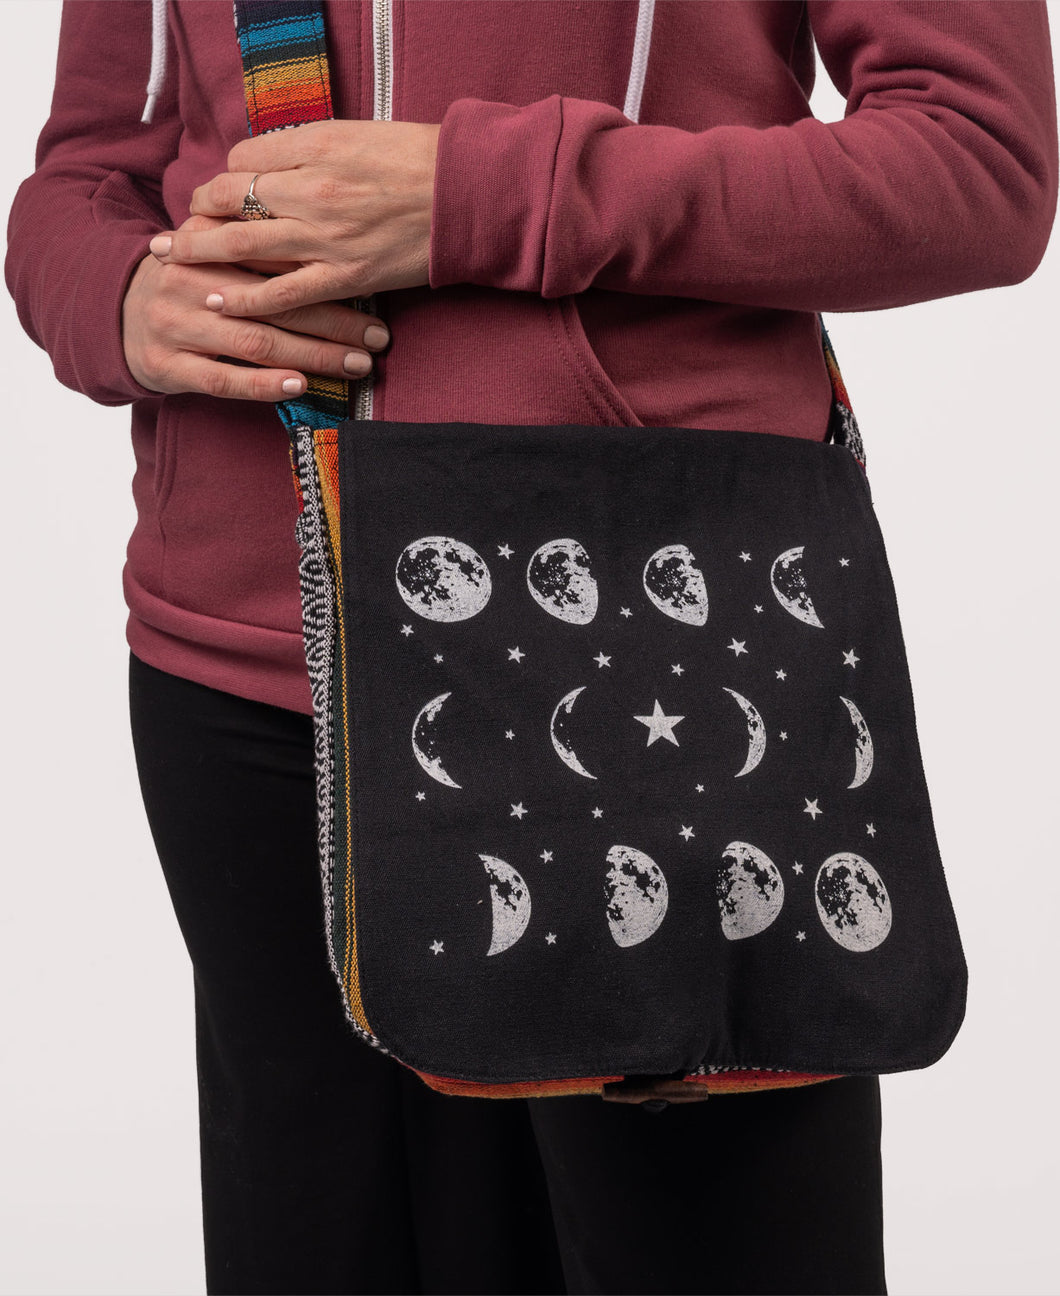 It's Just A Phase Moon Messenger Bag - Black